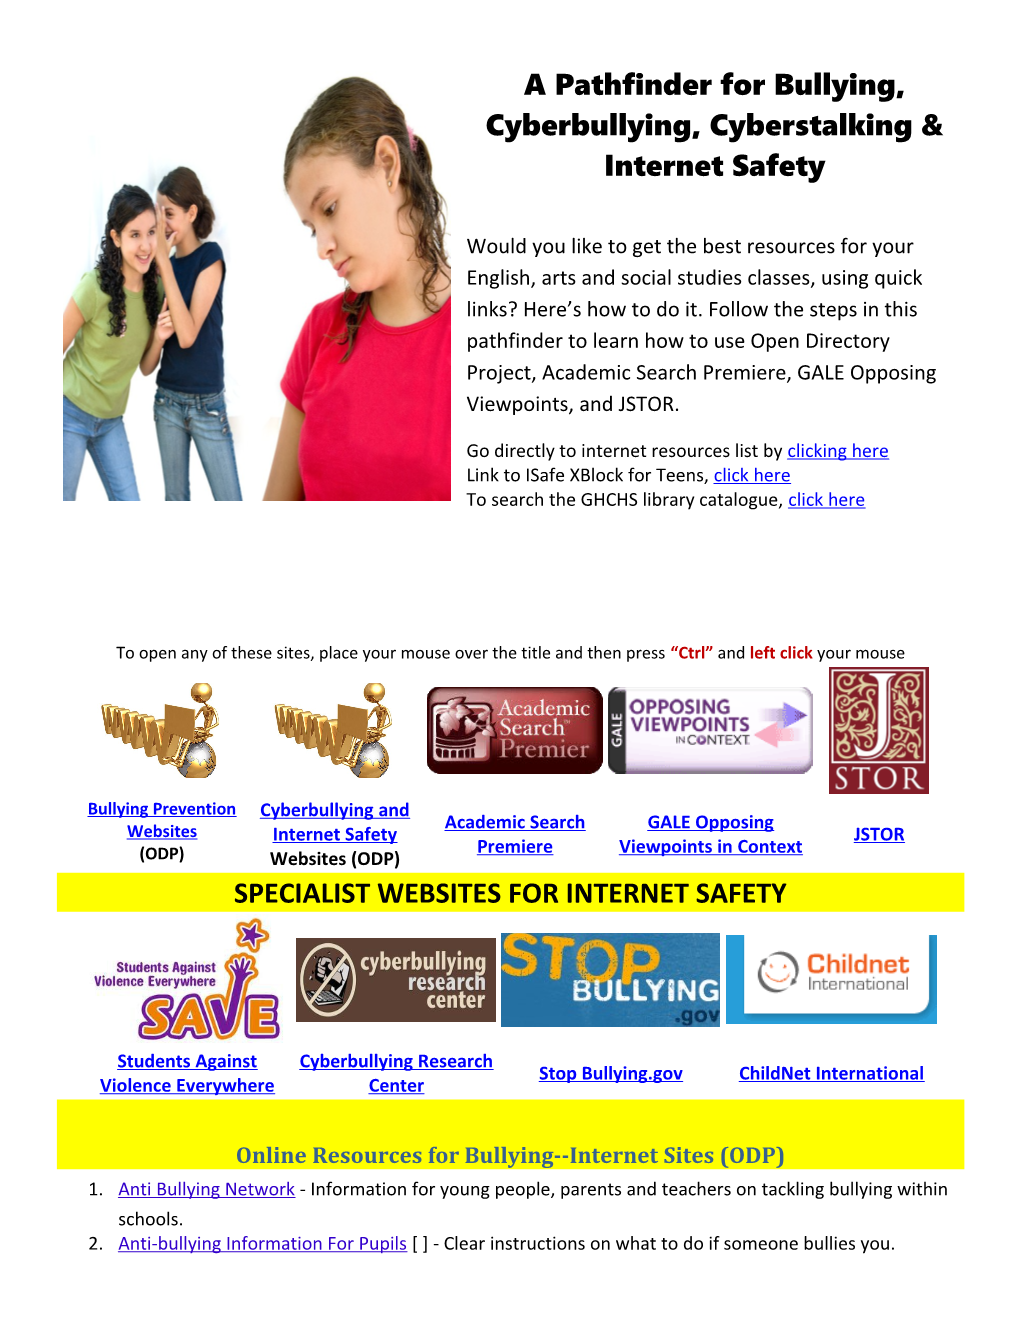 Online Resources for Bullying Internet Sites (ODP)